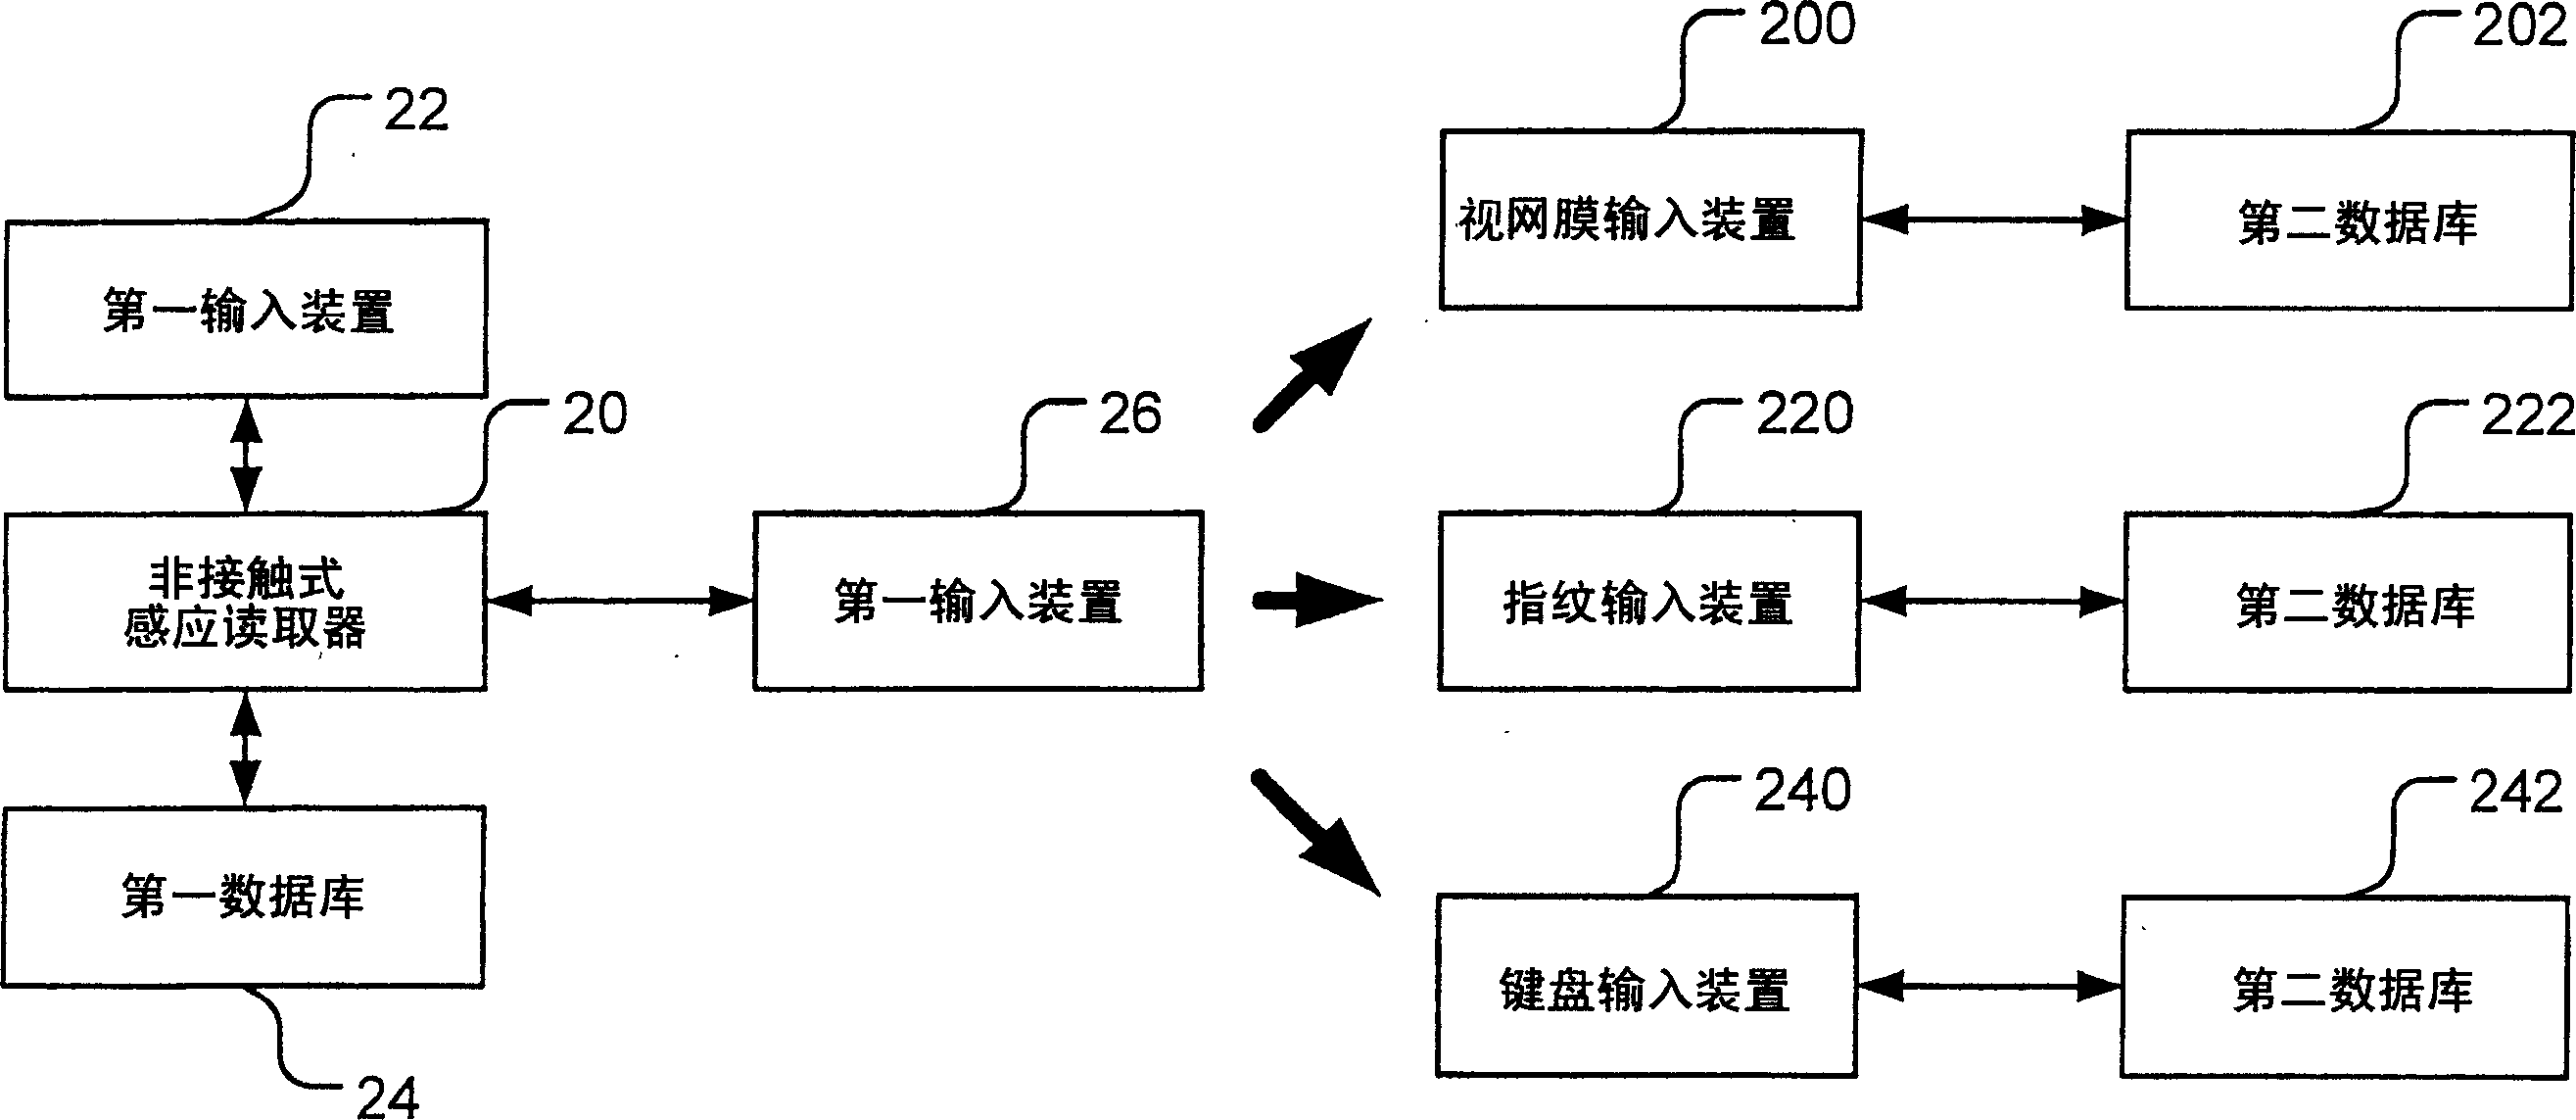 Method and equipment for finishing entrance guard authentication using wireless communication device